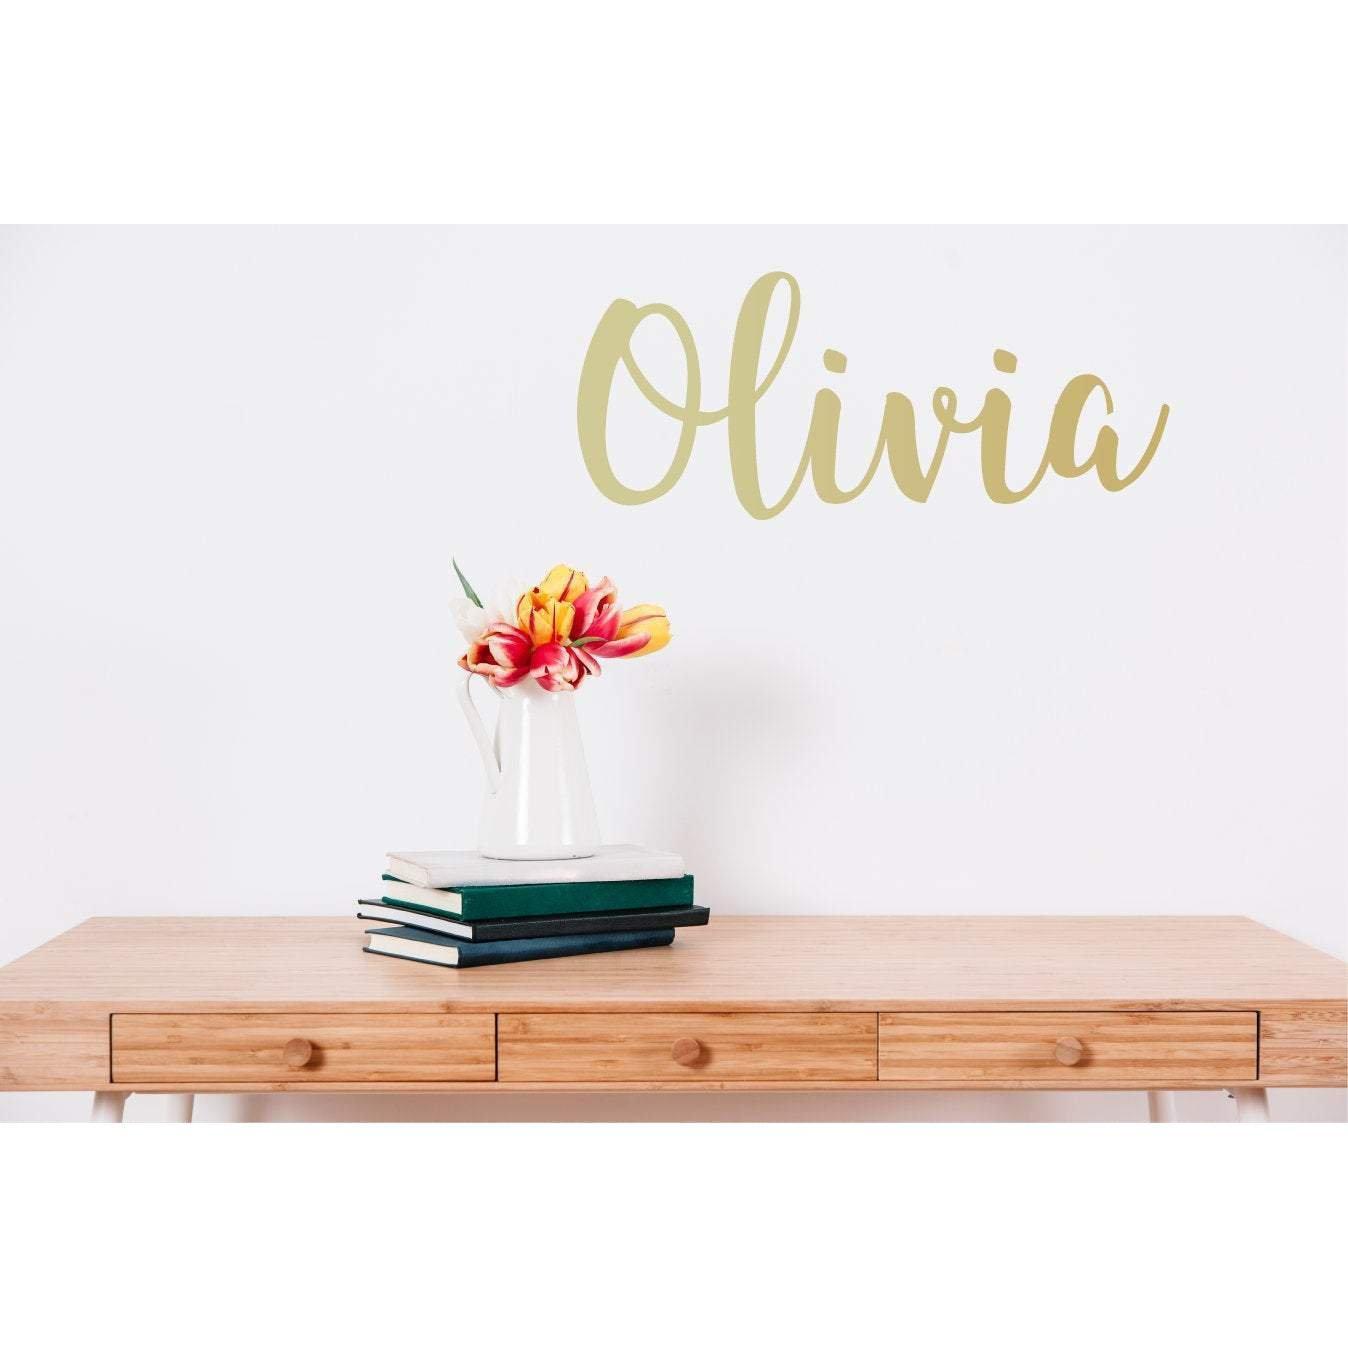 Design Your Own Wall Decal Sticker Custom Personalised Name Wall Art For Bedroom Office Nursery (36 Colours)